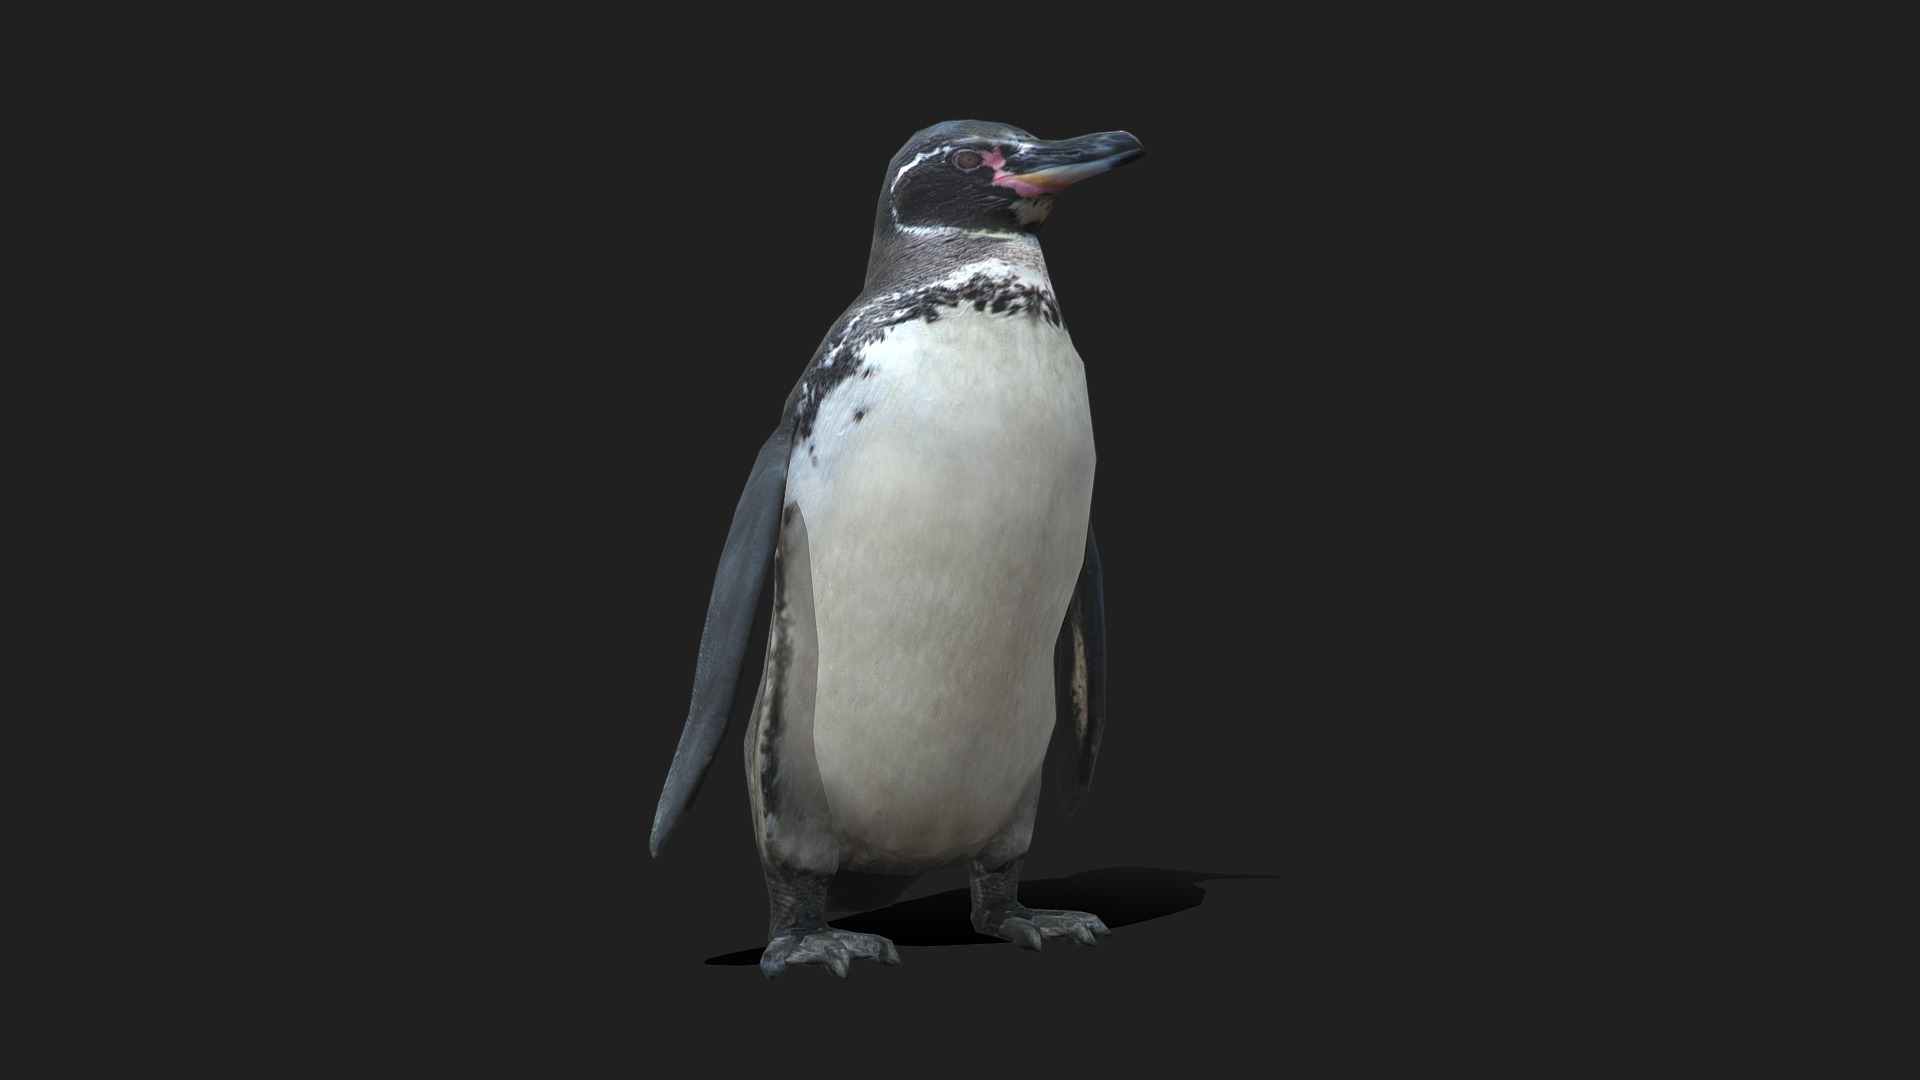 3D model Low Poly Galapagos Penguin - This is a 3D model of the Low Poly Galapagos Penguin. The 3D model is about a penguin with a long beak.